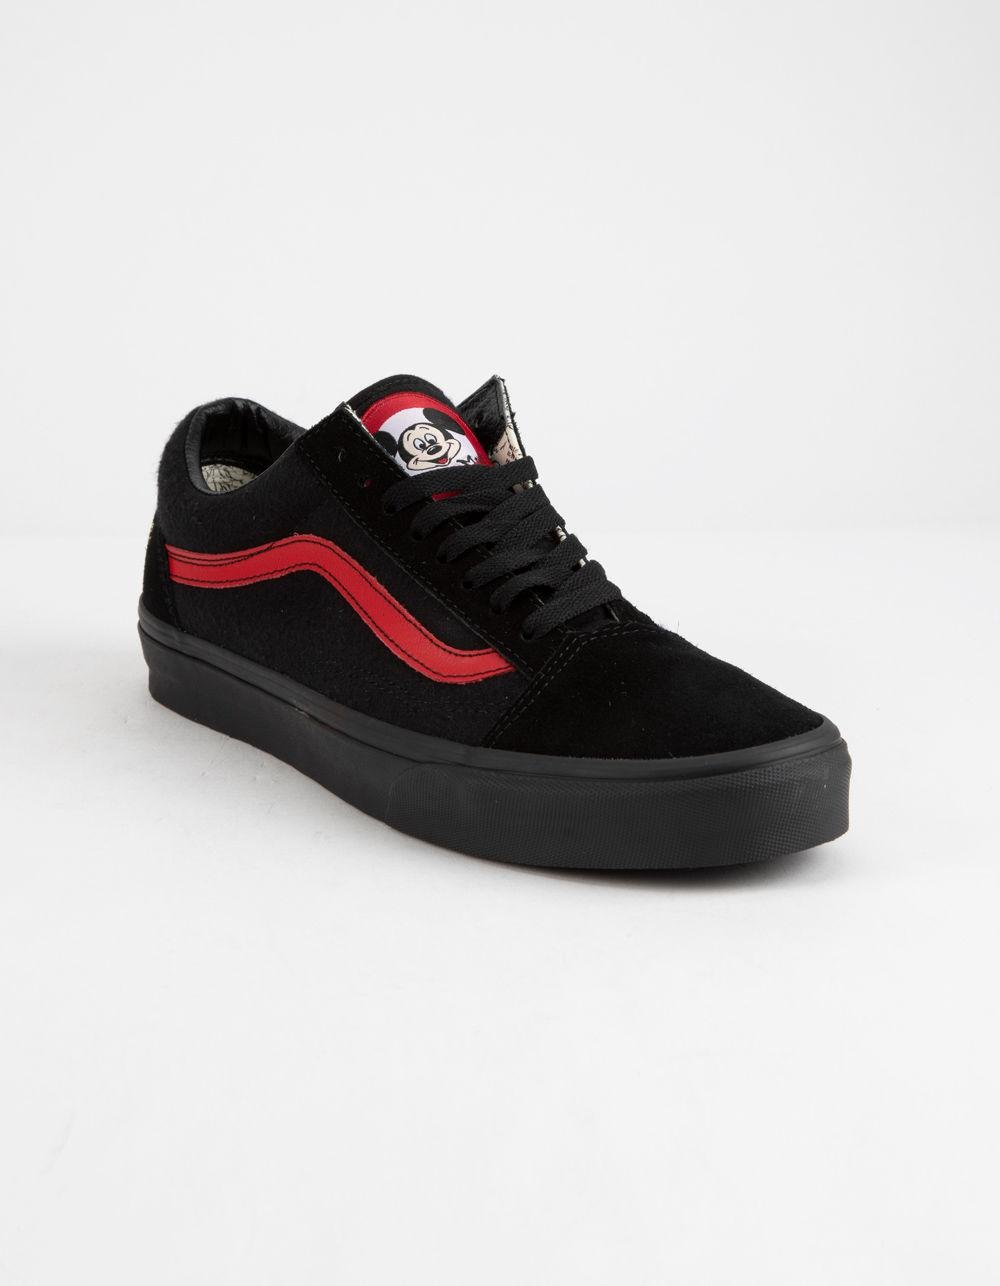 mickey mouse vans black and red